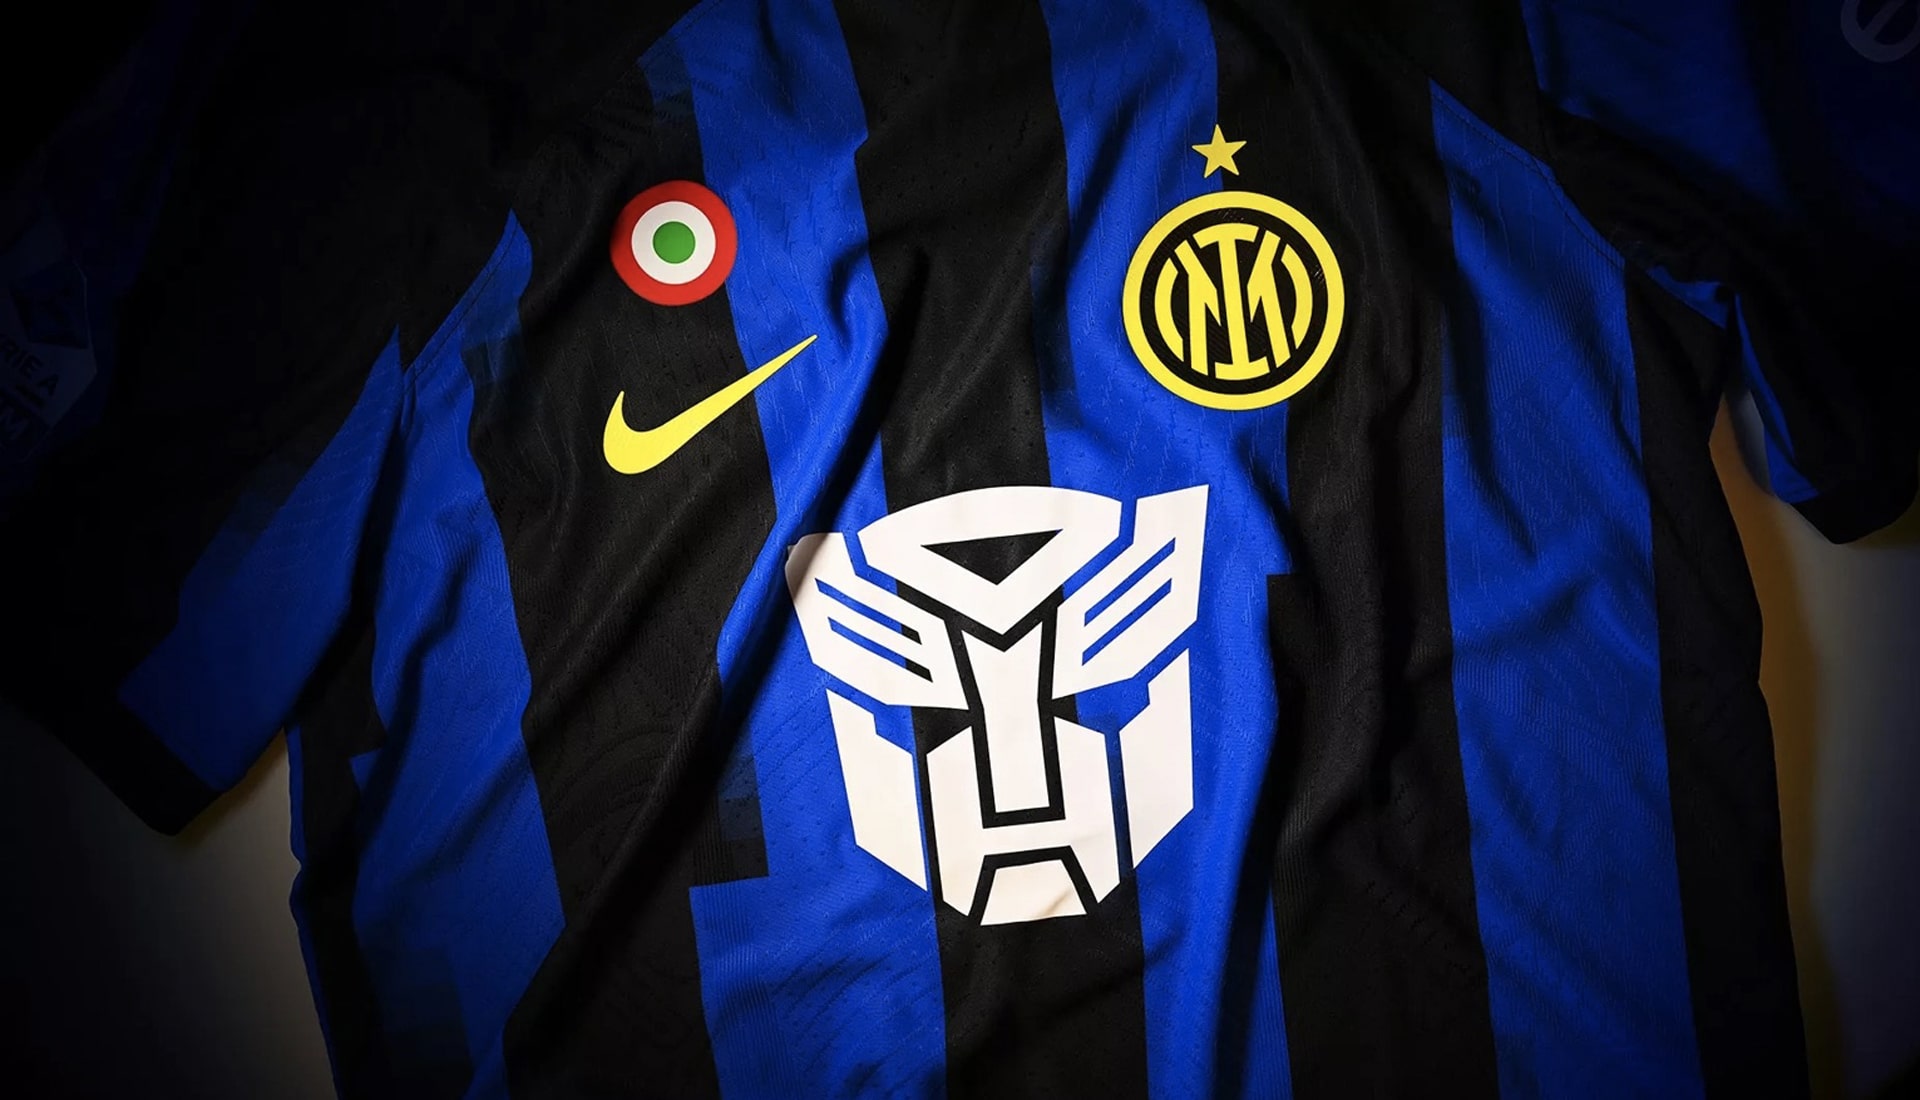 Inter's Home Shirt To Feature Transformers Logo In Upcoming Match -  SoccerBible